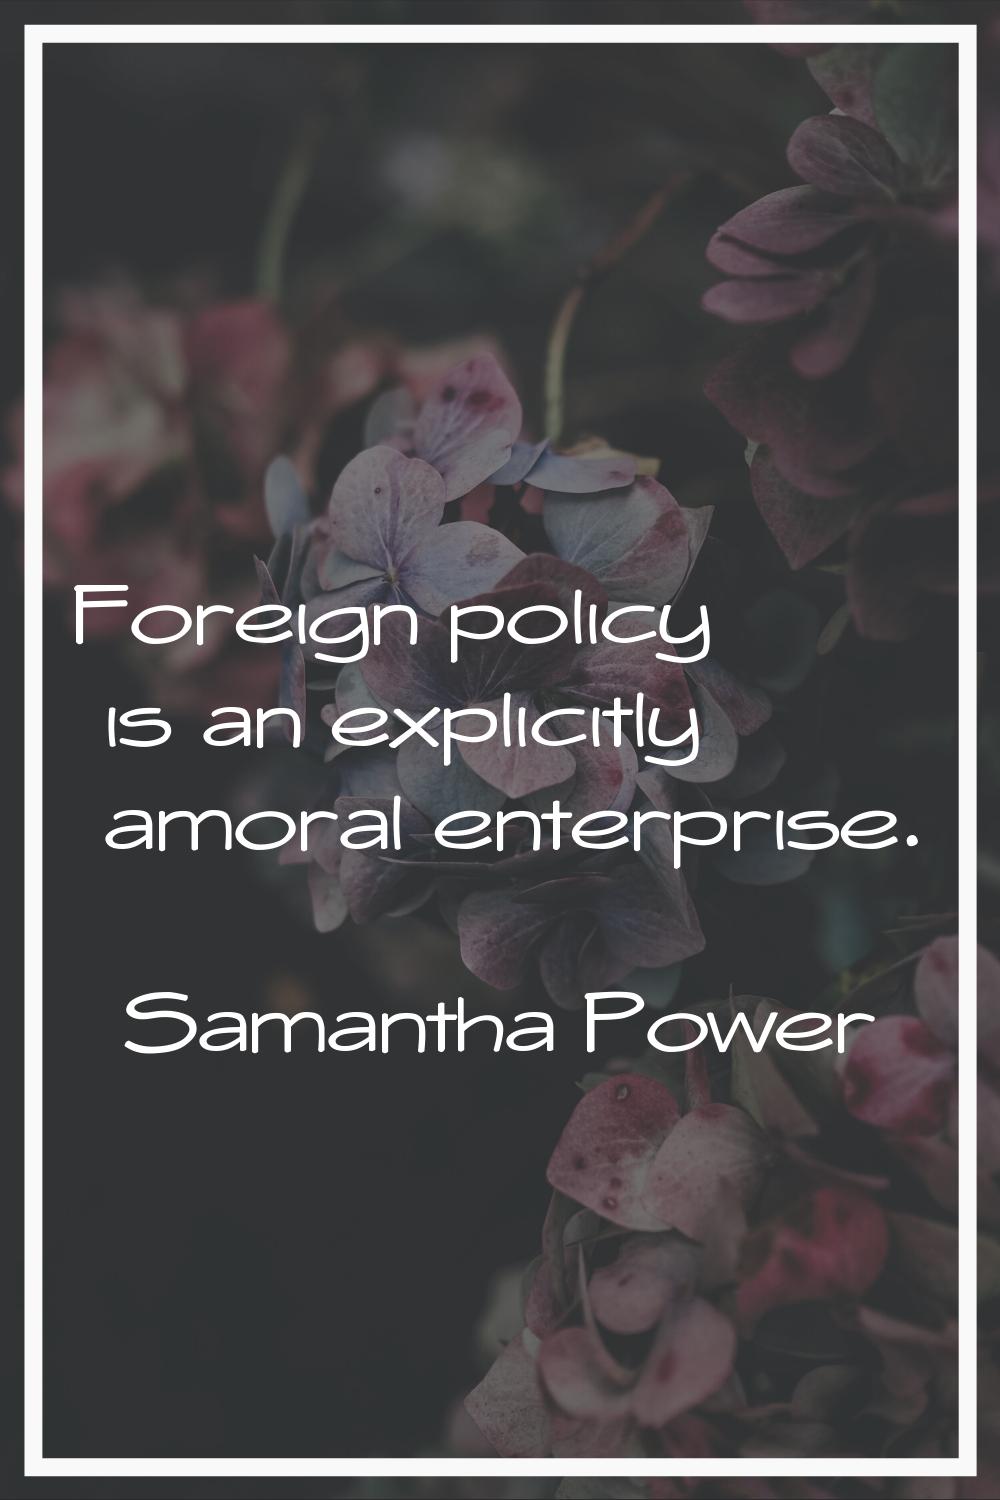 Foreign policy is an explicitly amoral enterprise.